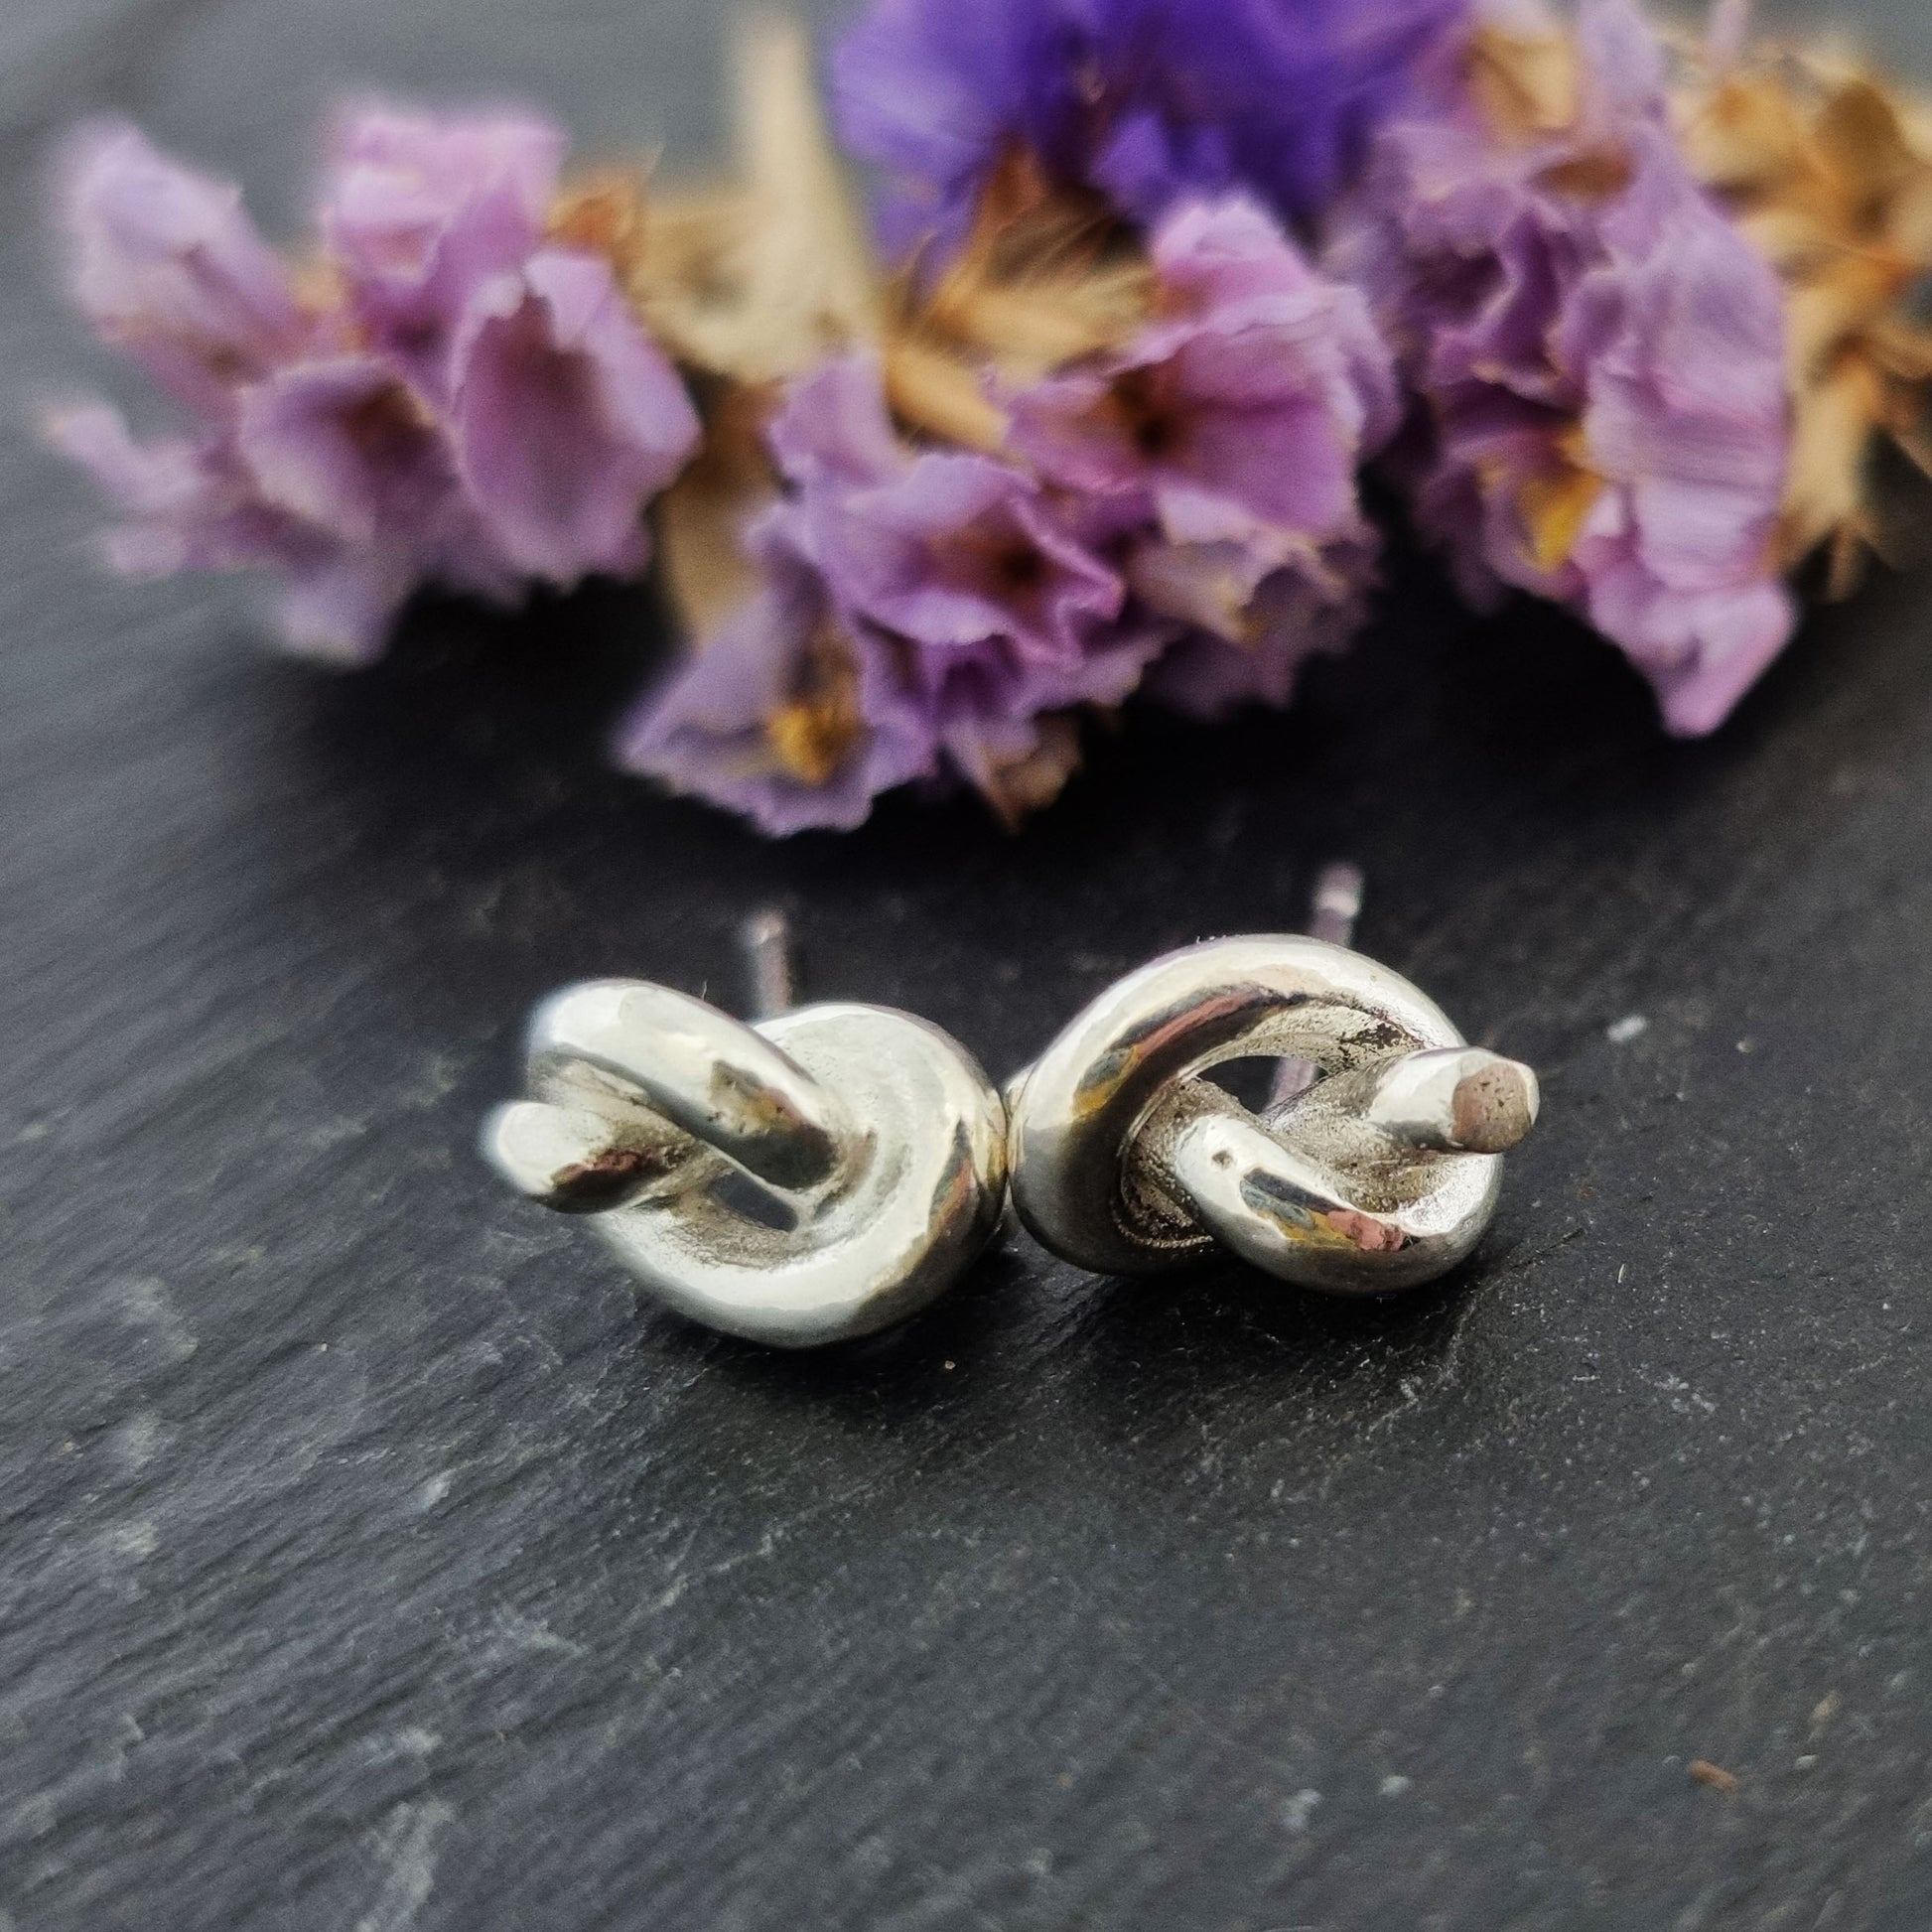 Silver stud earrings in the shape of a knot in a piece of string. Pictured with flowers.